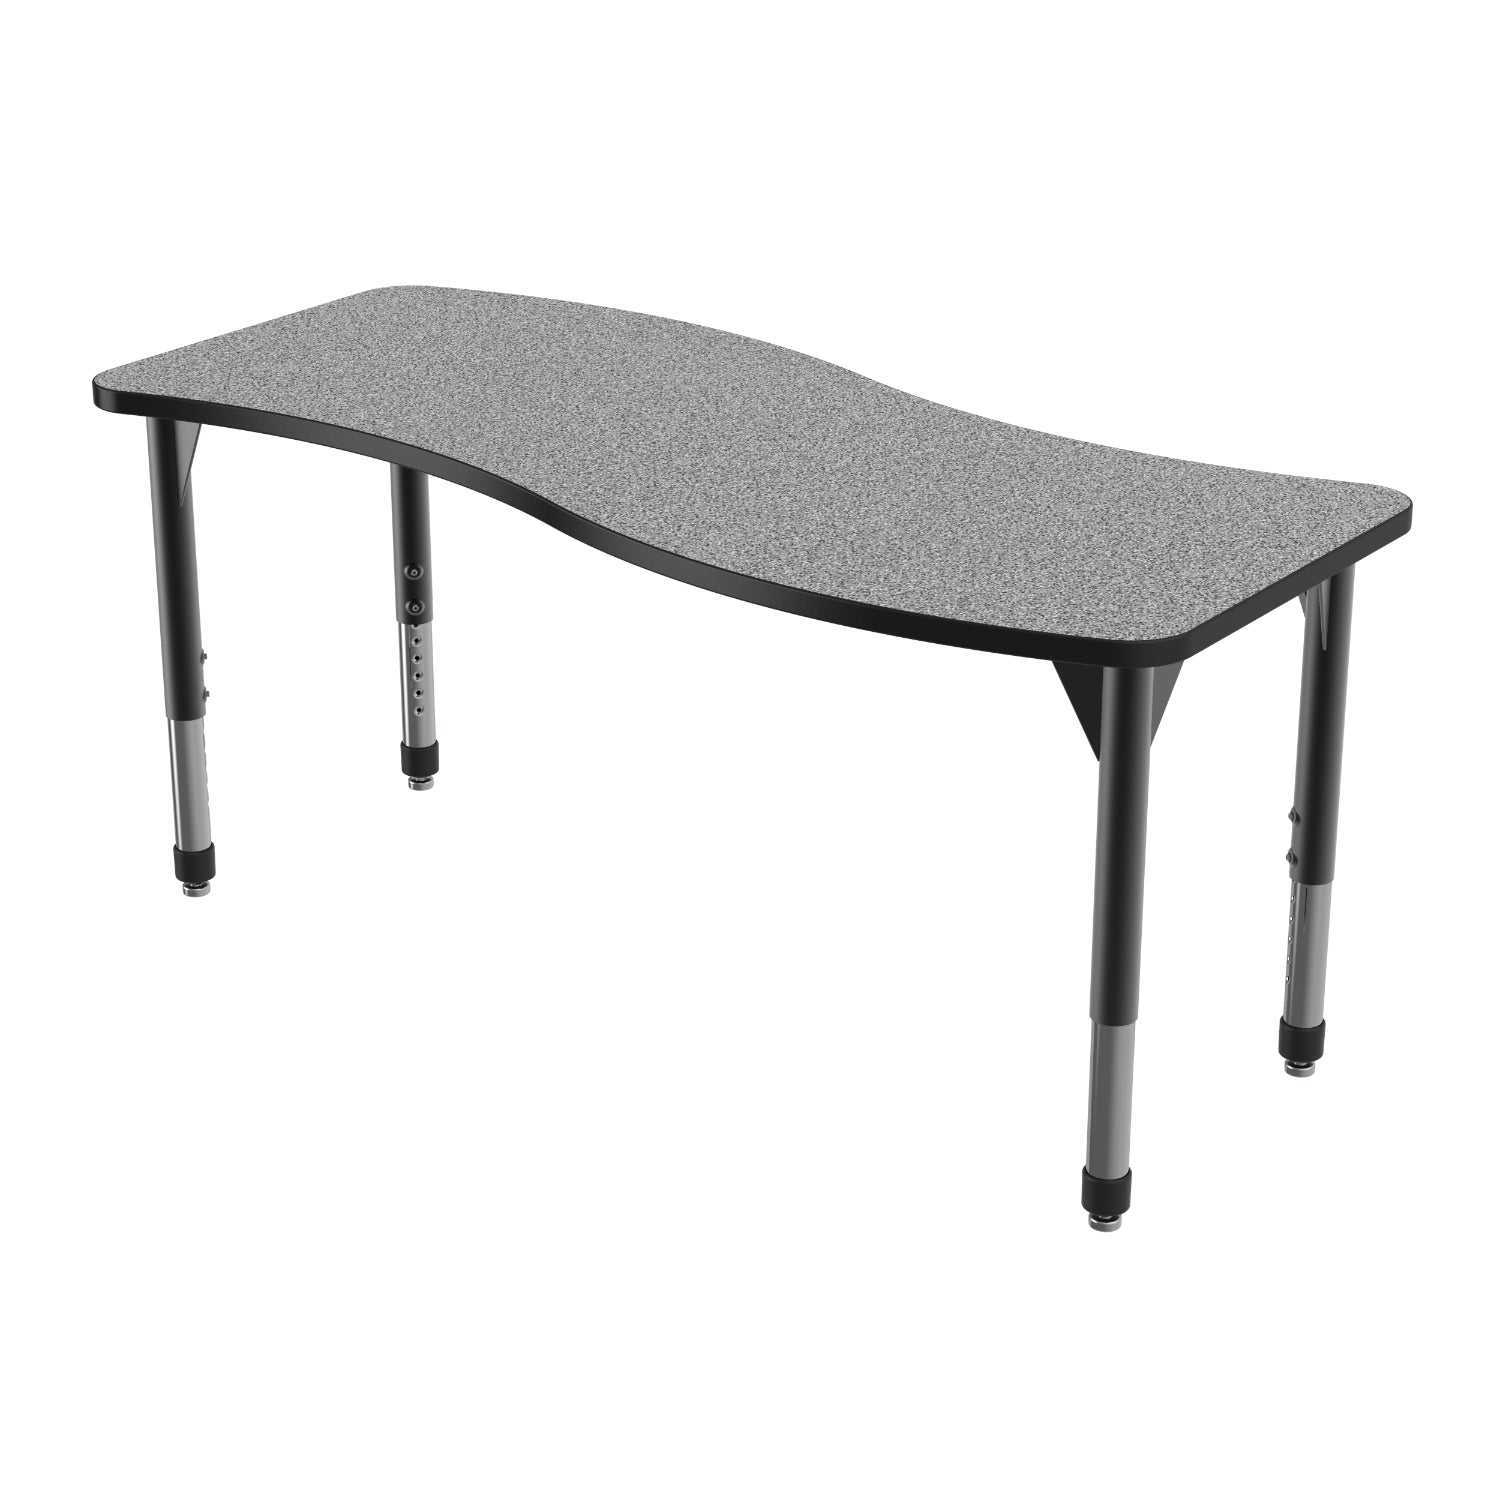 Premier Standing Height Collaborative Classroom Table, 24" x 60" Wave